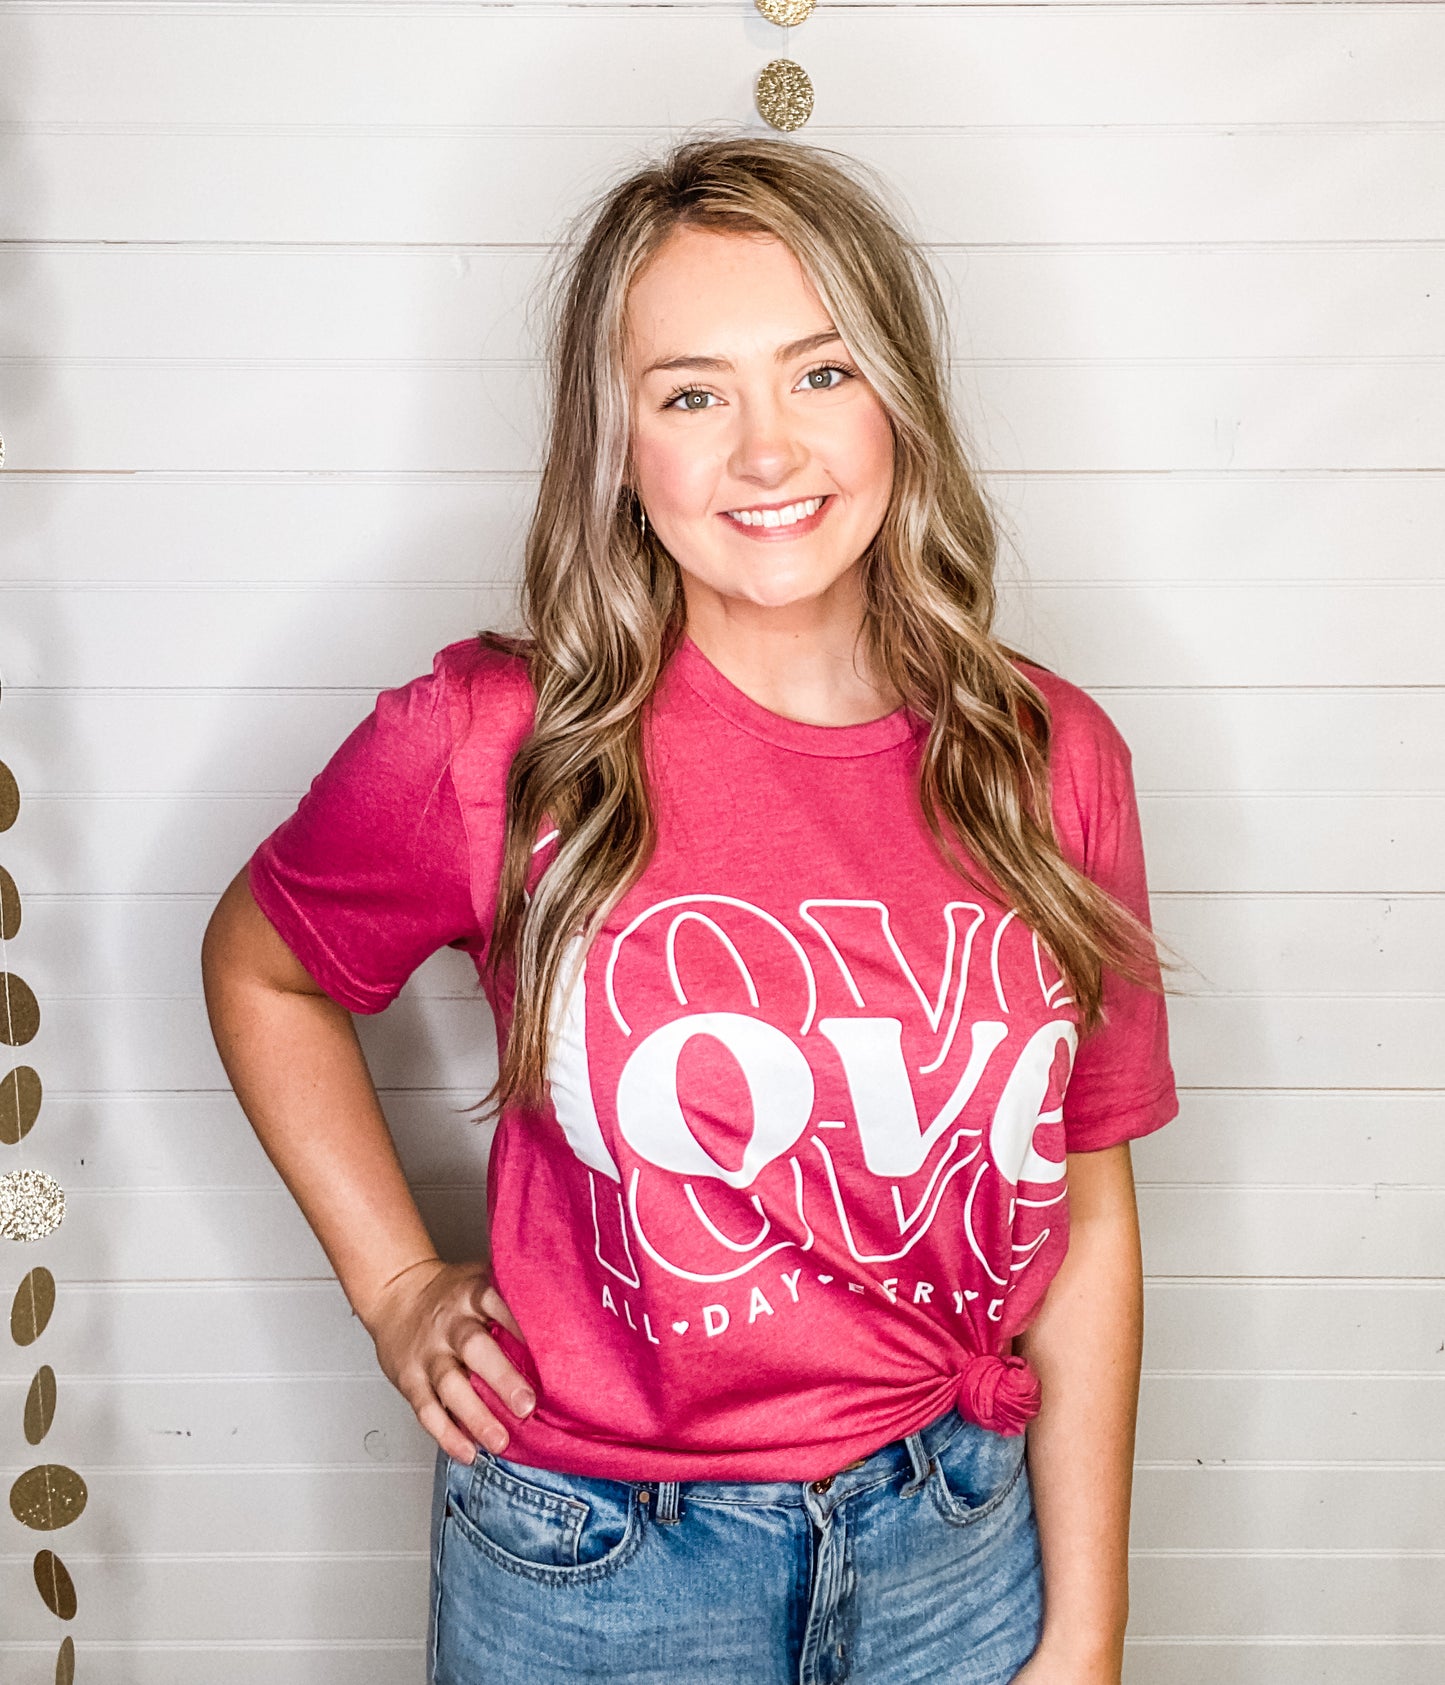 Love - All Day, Every Day Graphic Tee